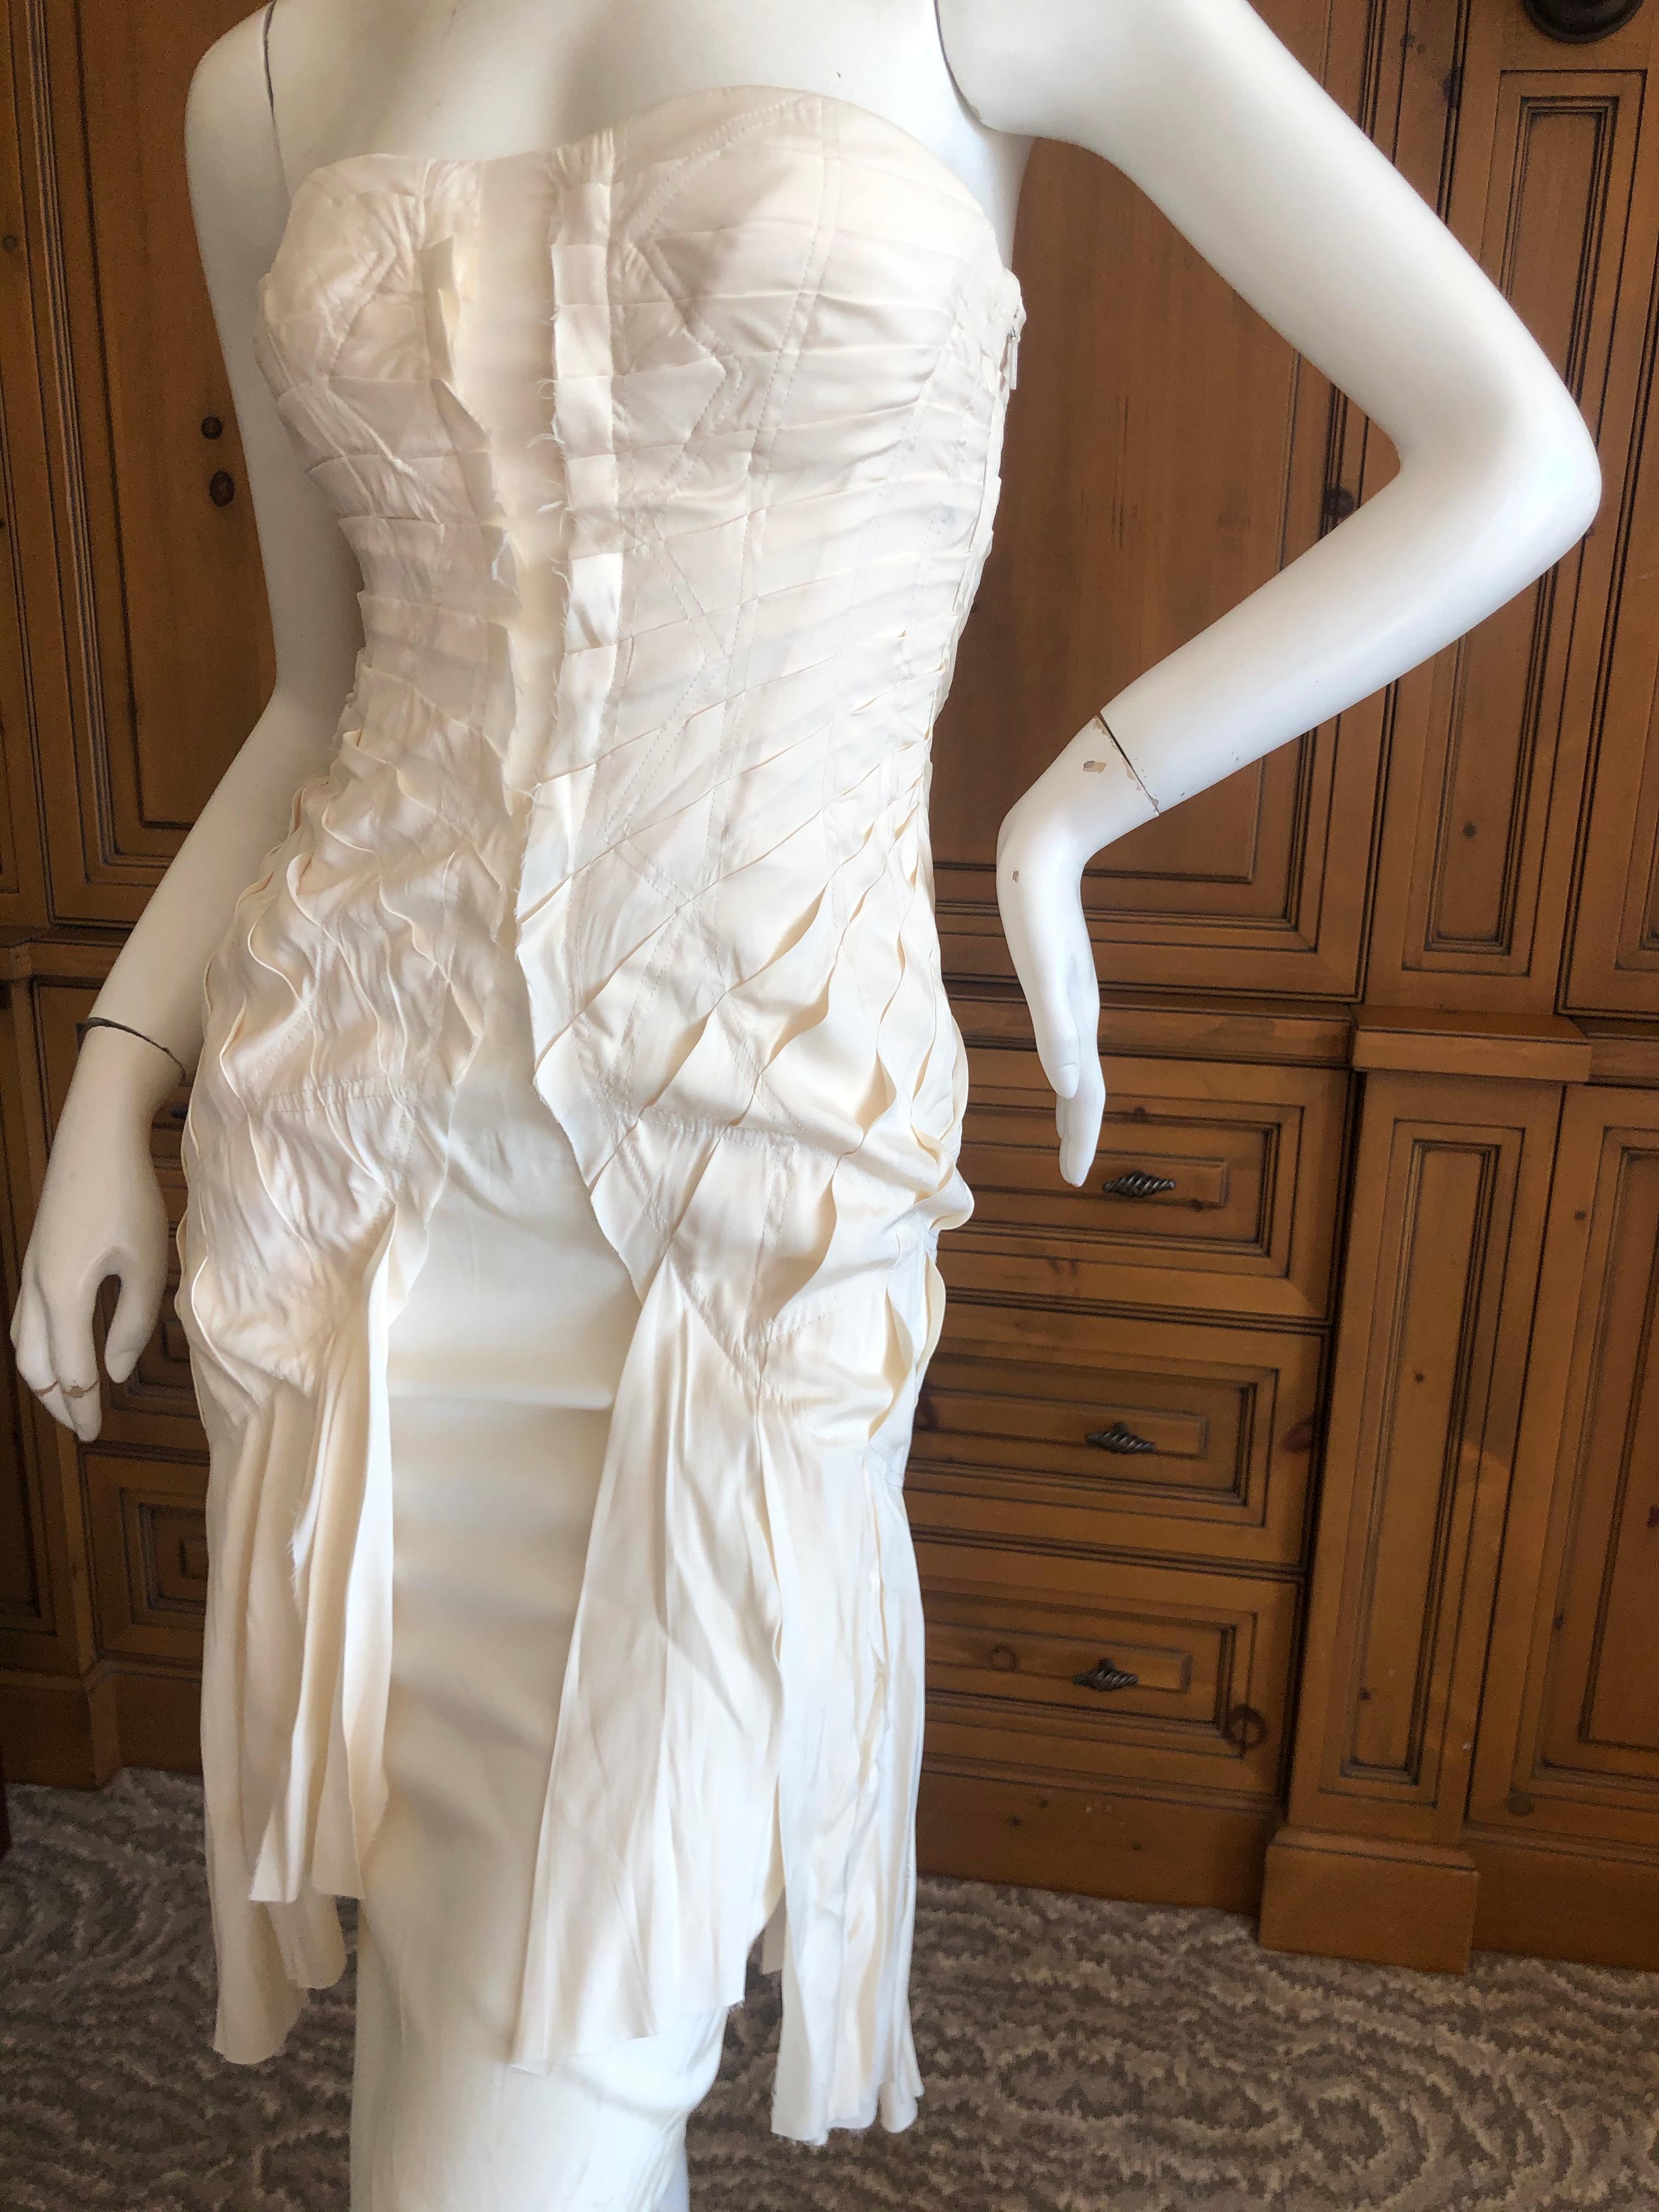 Gucci by Tom Ford Spring 2003 Sexy Strapless Ivory Ribbon Dress In Excellent Condition For Sale In Cloverdale, CA